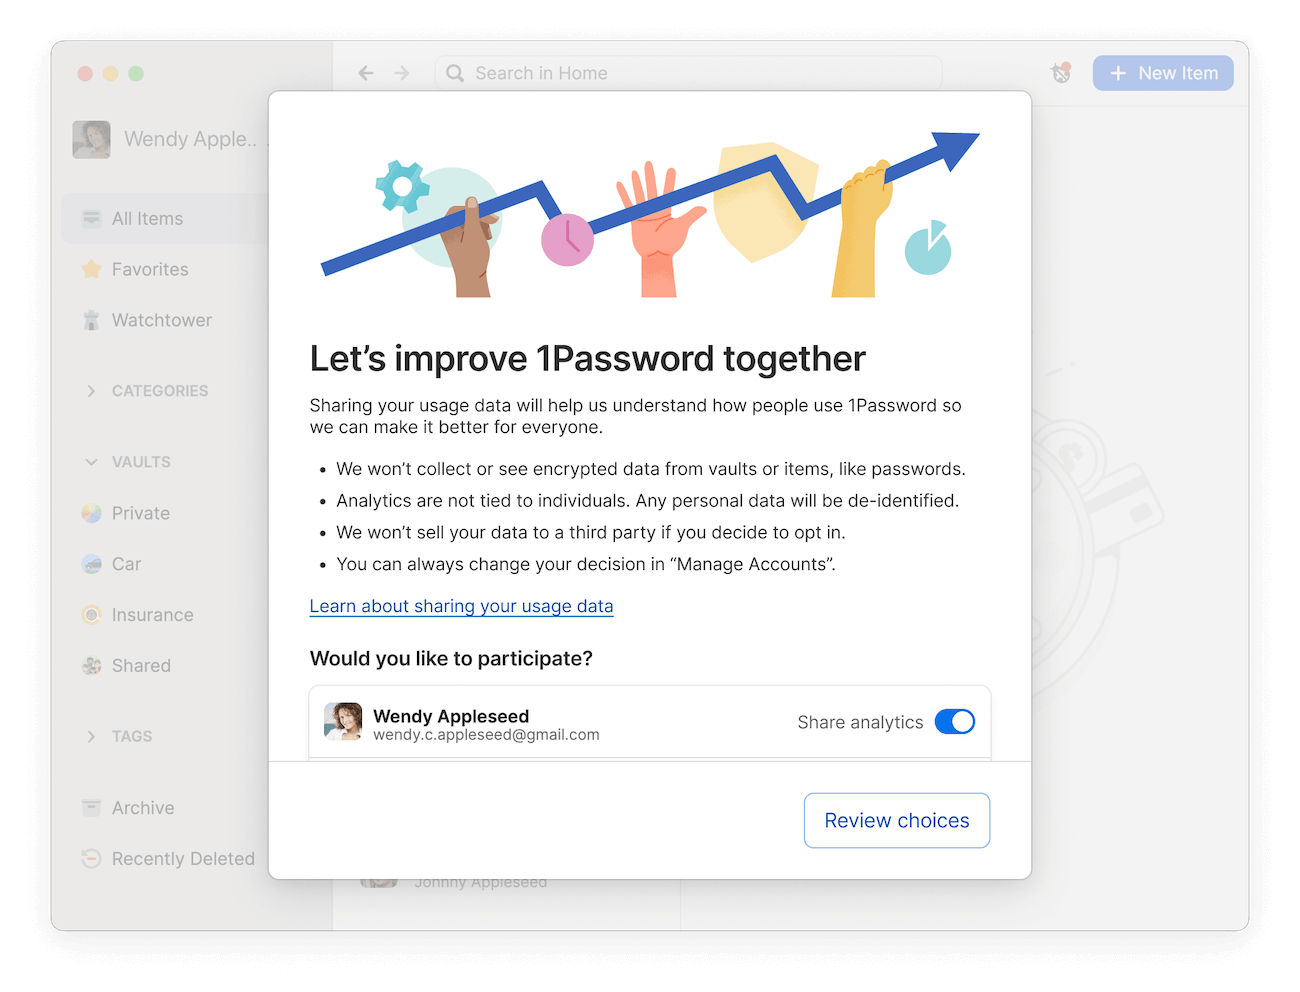 A screenshot showing the in-app message for 1Password's privacy-preserving telemetry system.